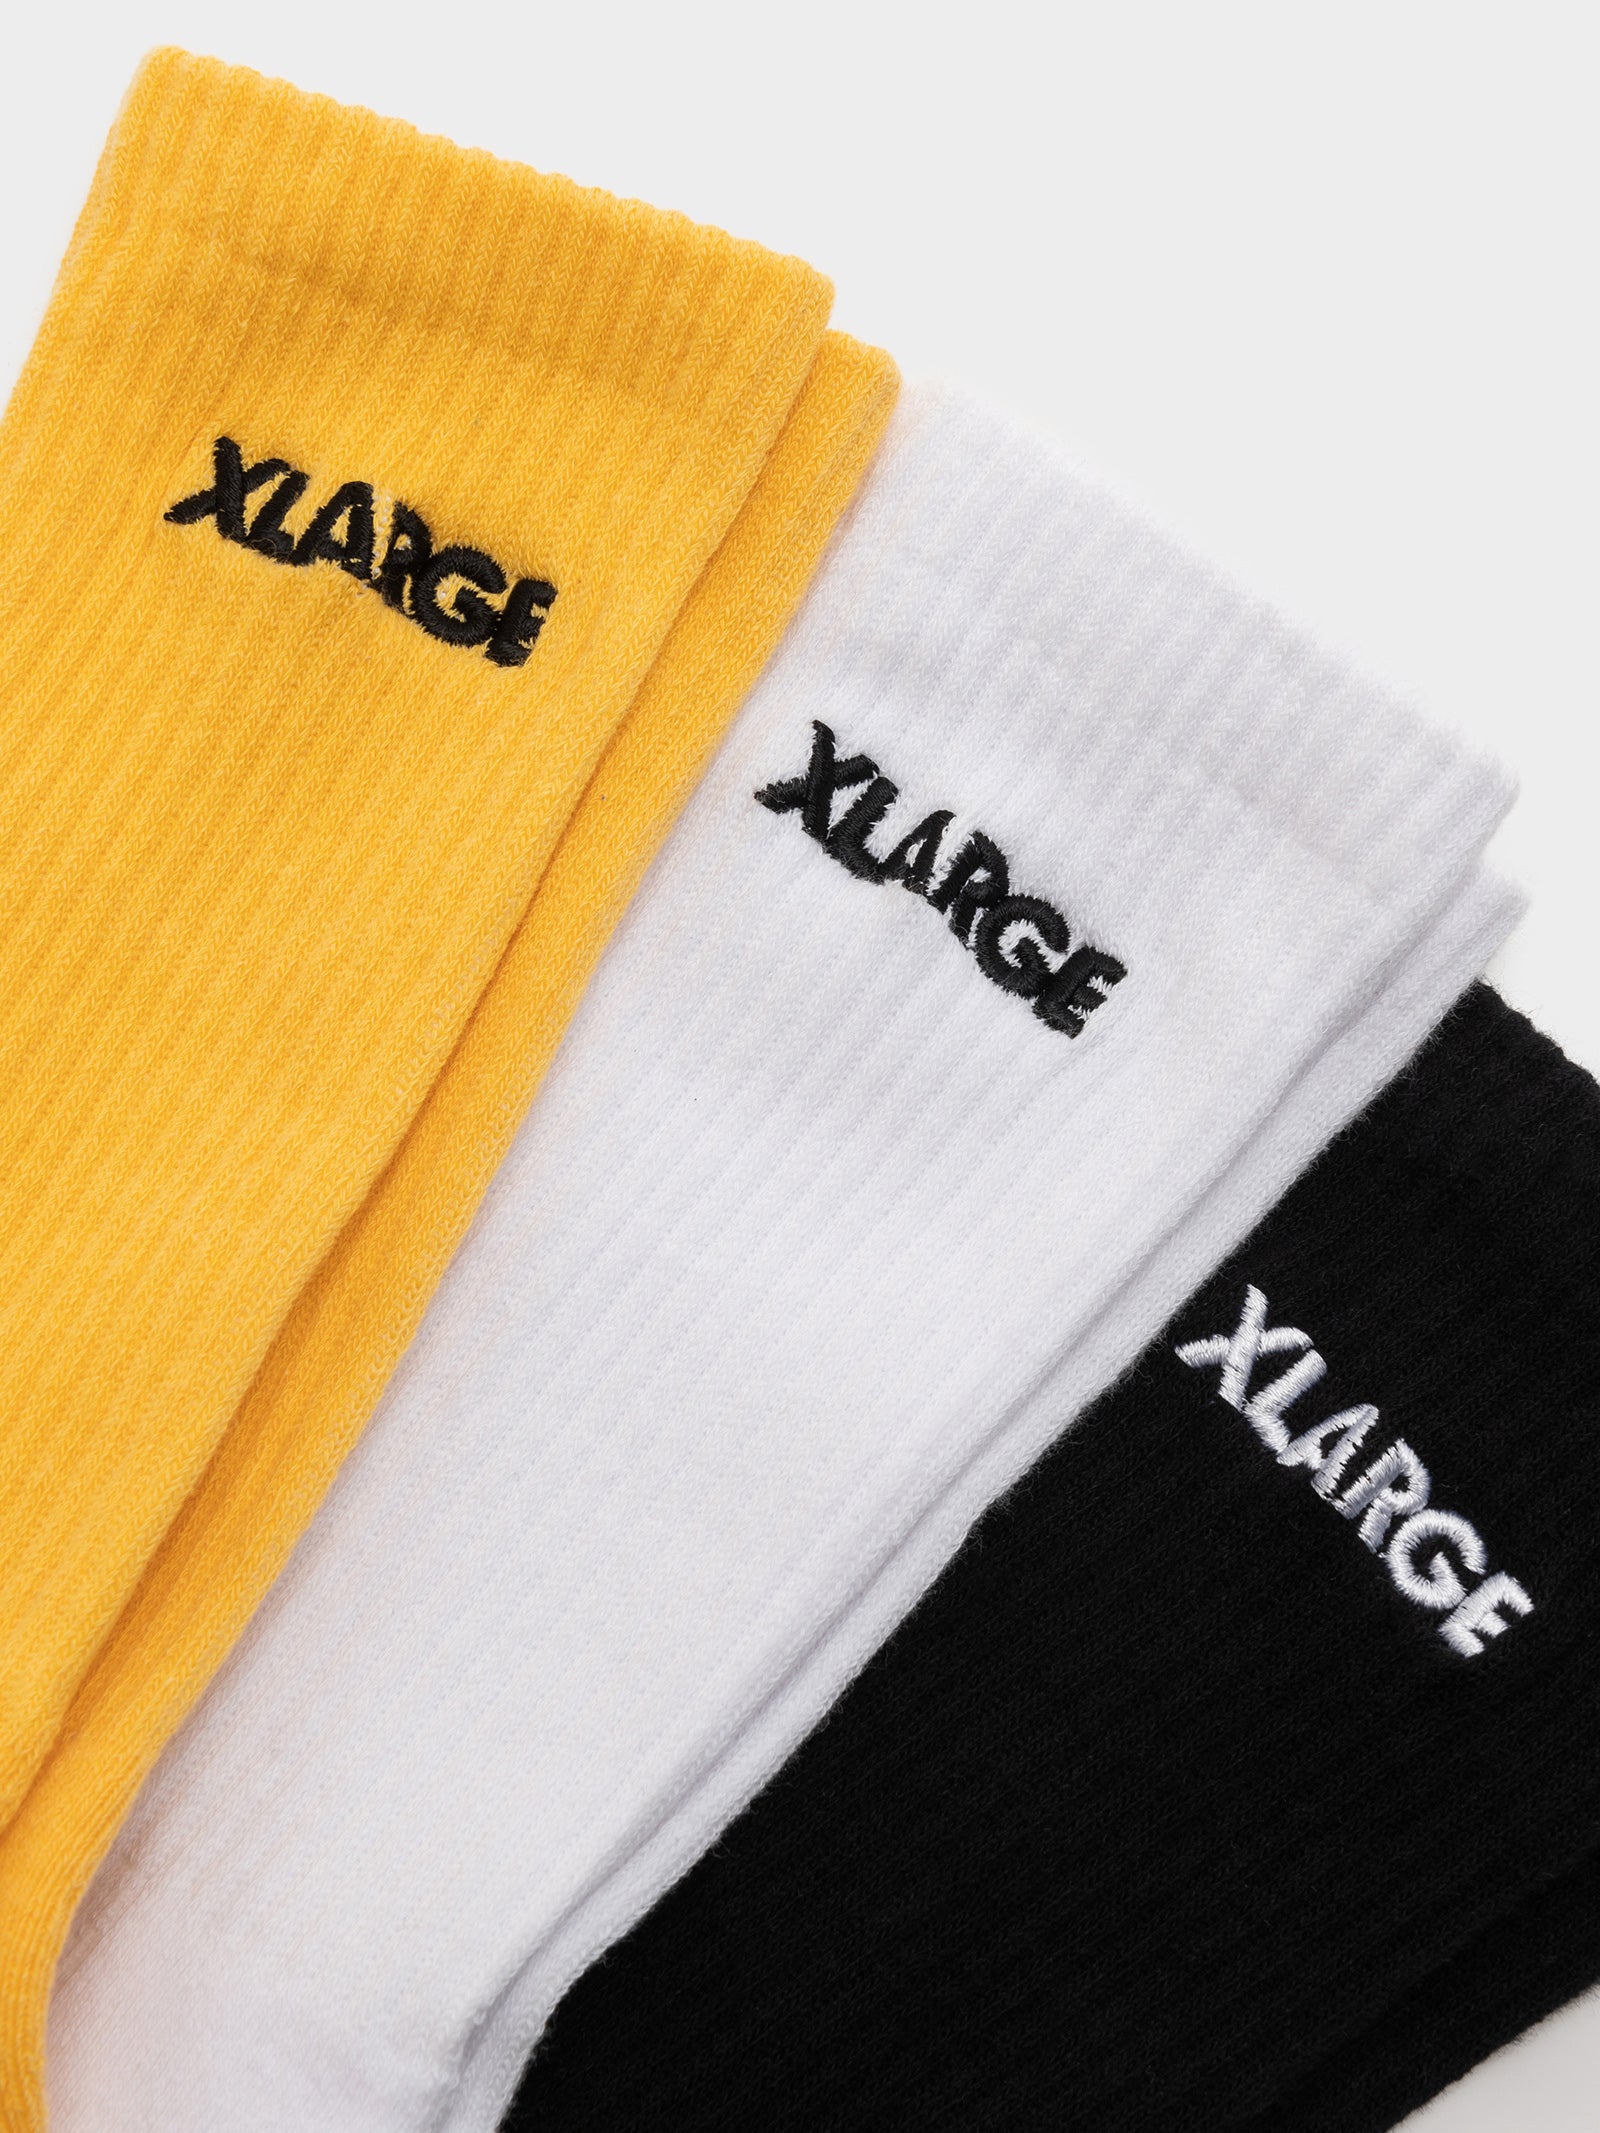 3 Pairs of 91 Text Socks in White, Black & Yellow